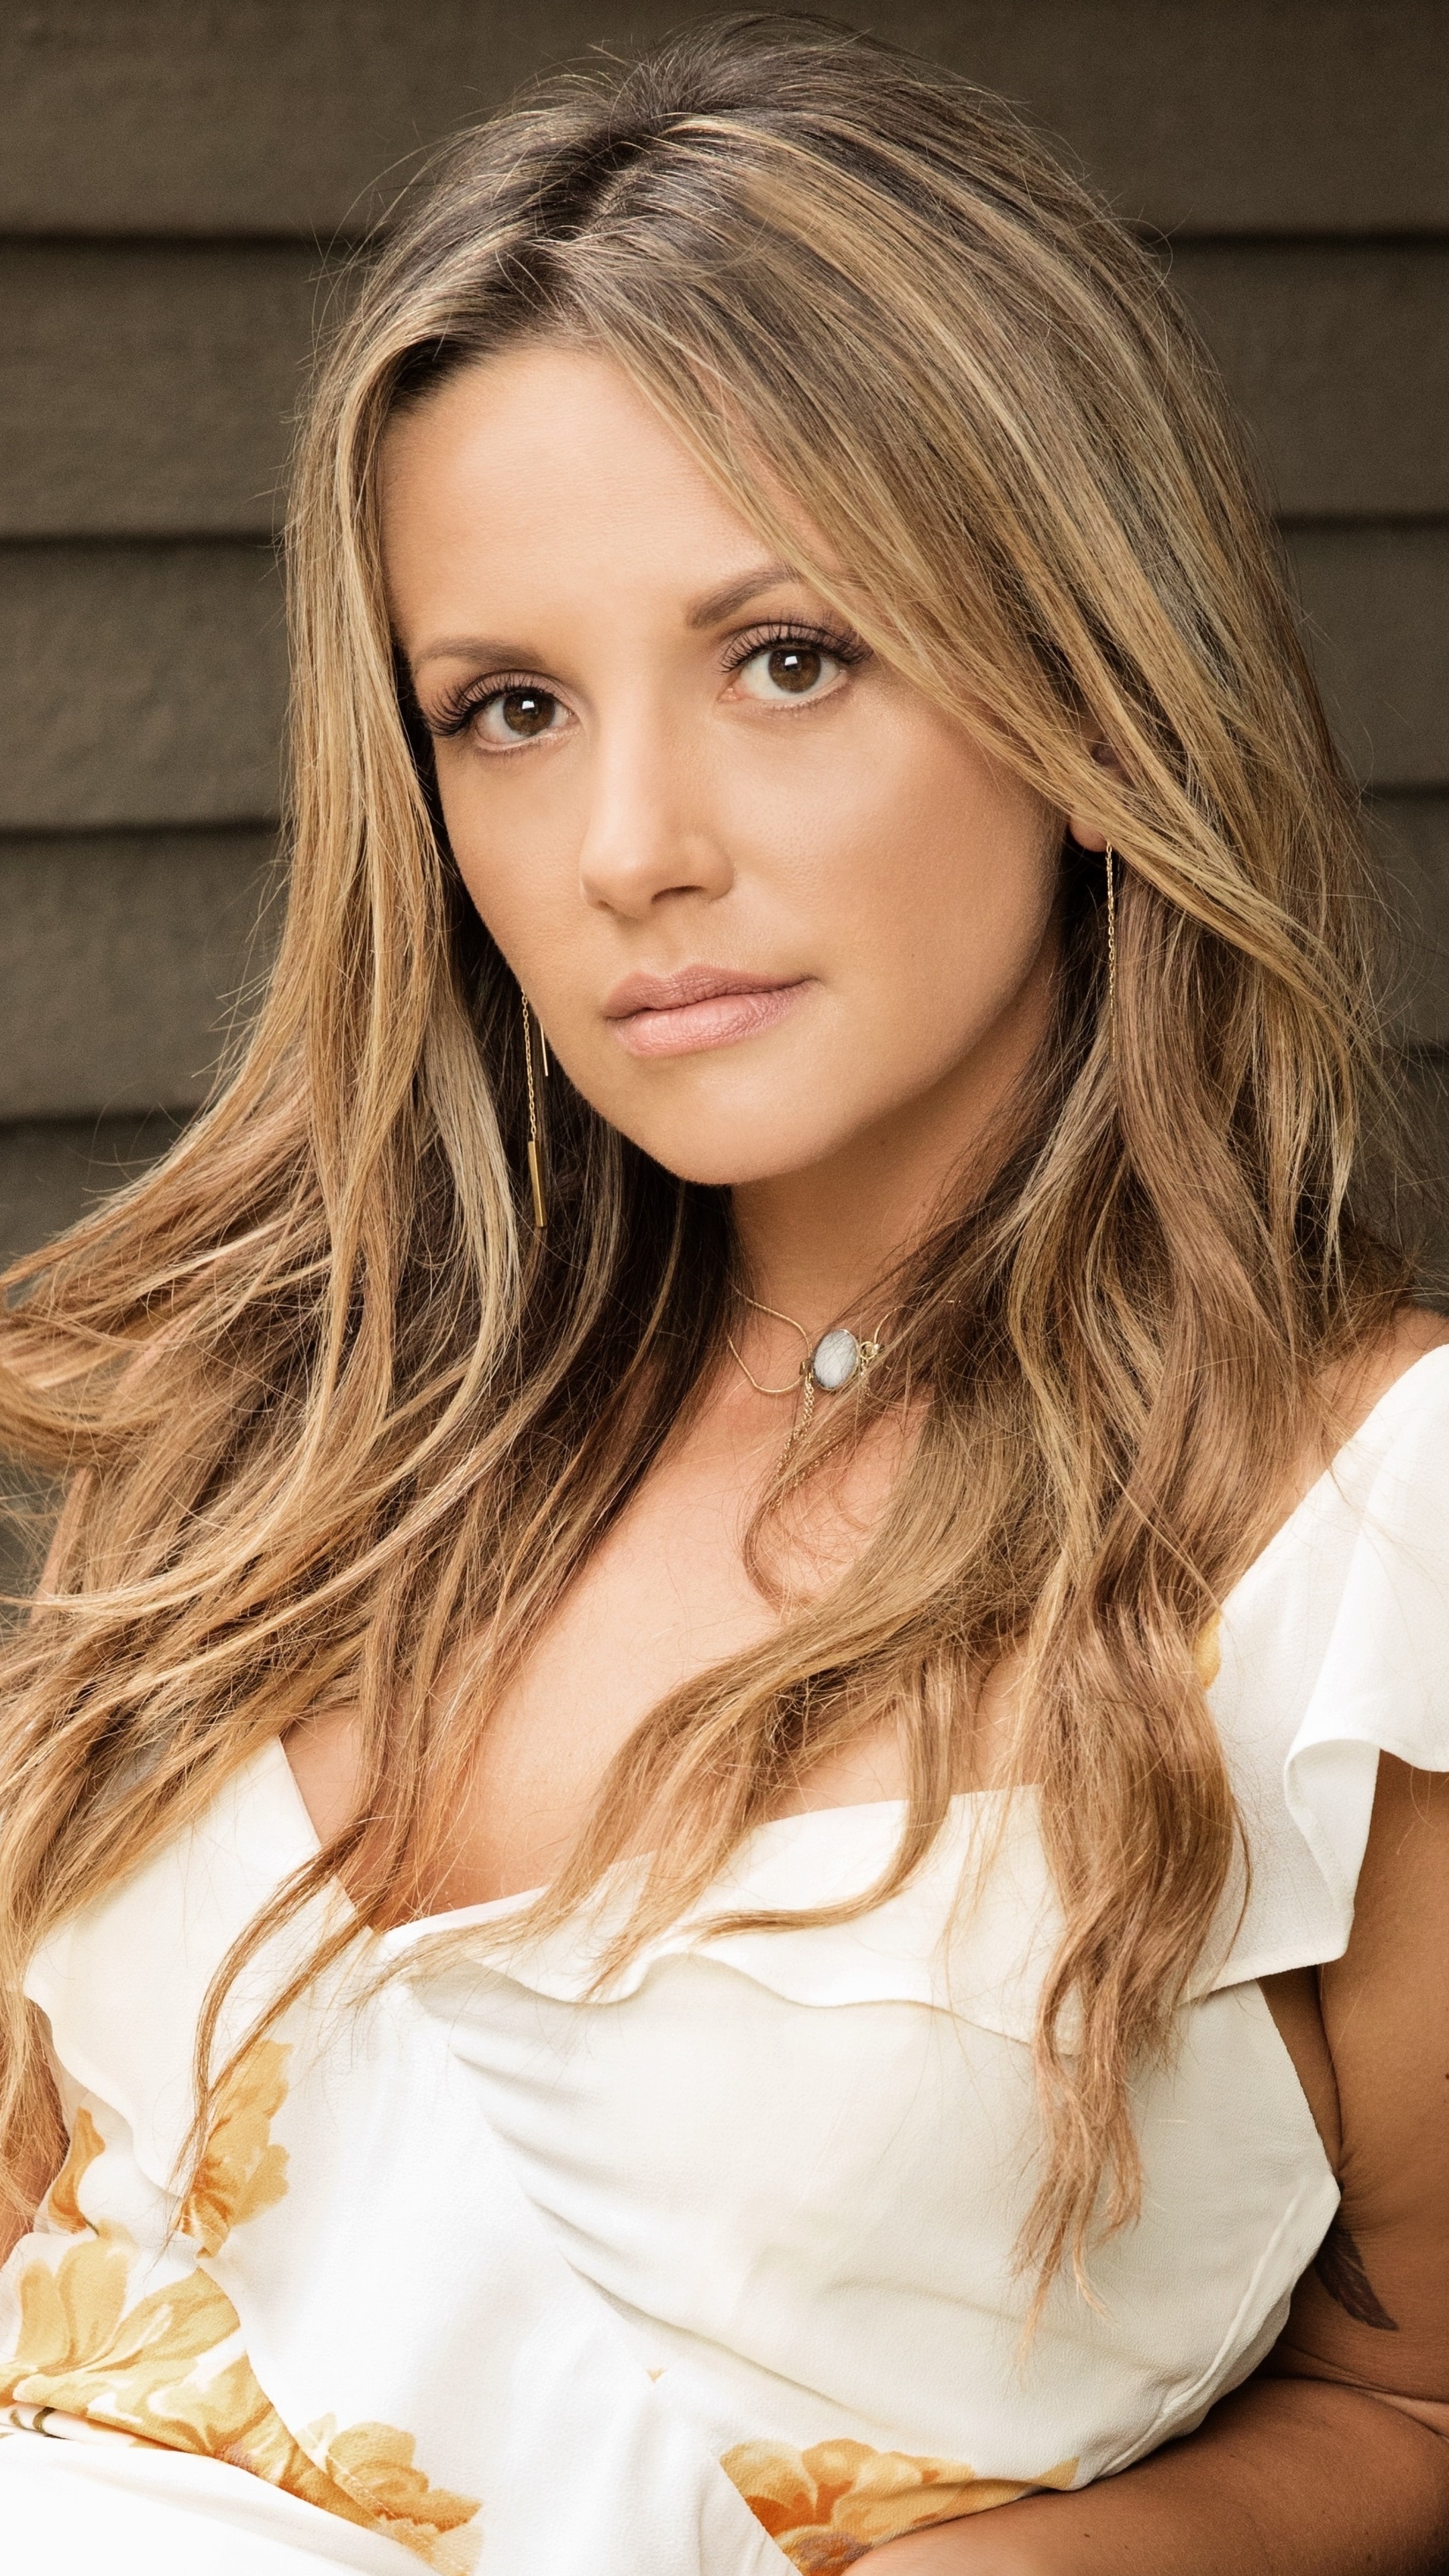 Carly Pearce Sony Xperia X, XZ, Z5 Premium HD 4k Wallpapers, Images, Backgrounds, Photos and Pictures 2160x3840